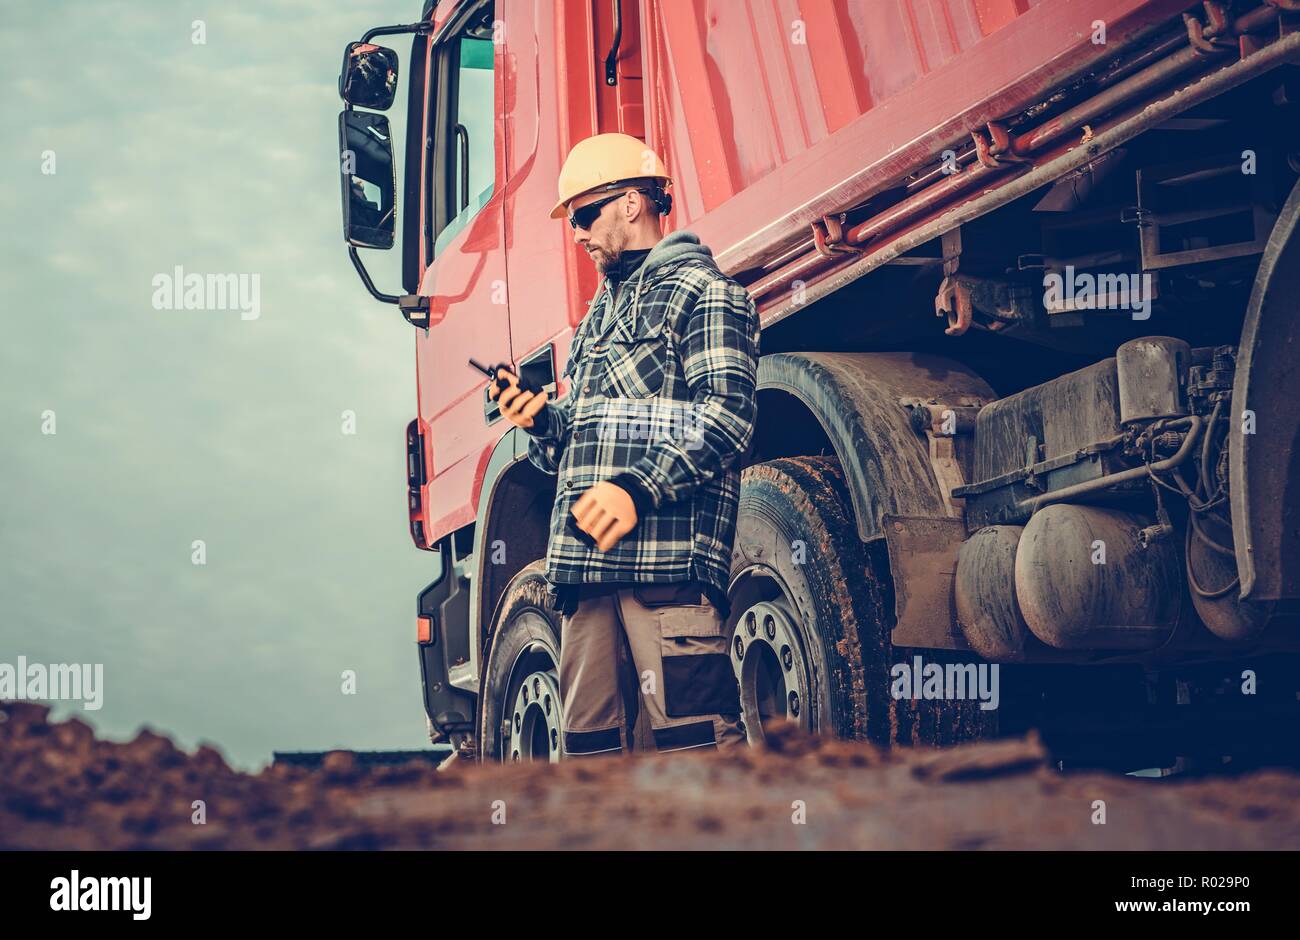 Caucasian Dump Truck Driver in His 30s and the Construction Site Full of Dirt to Move. Stock Photo